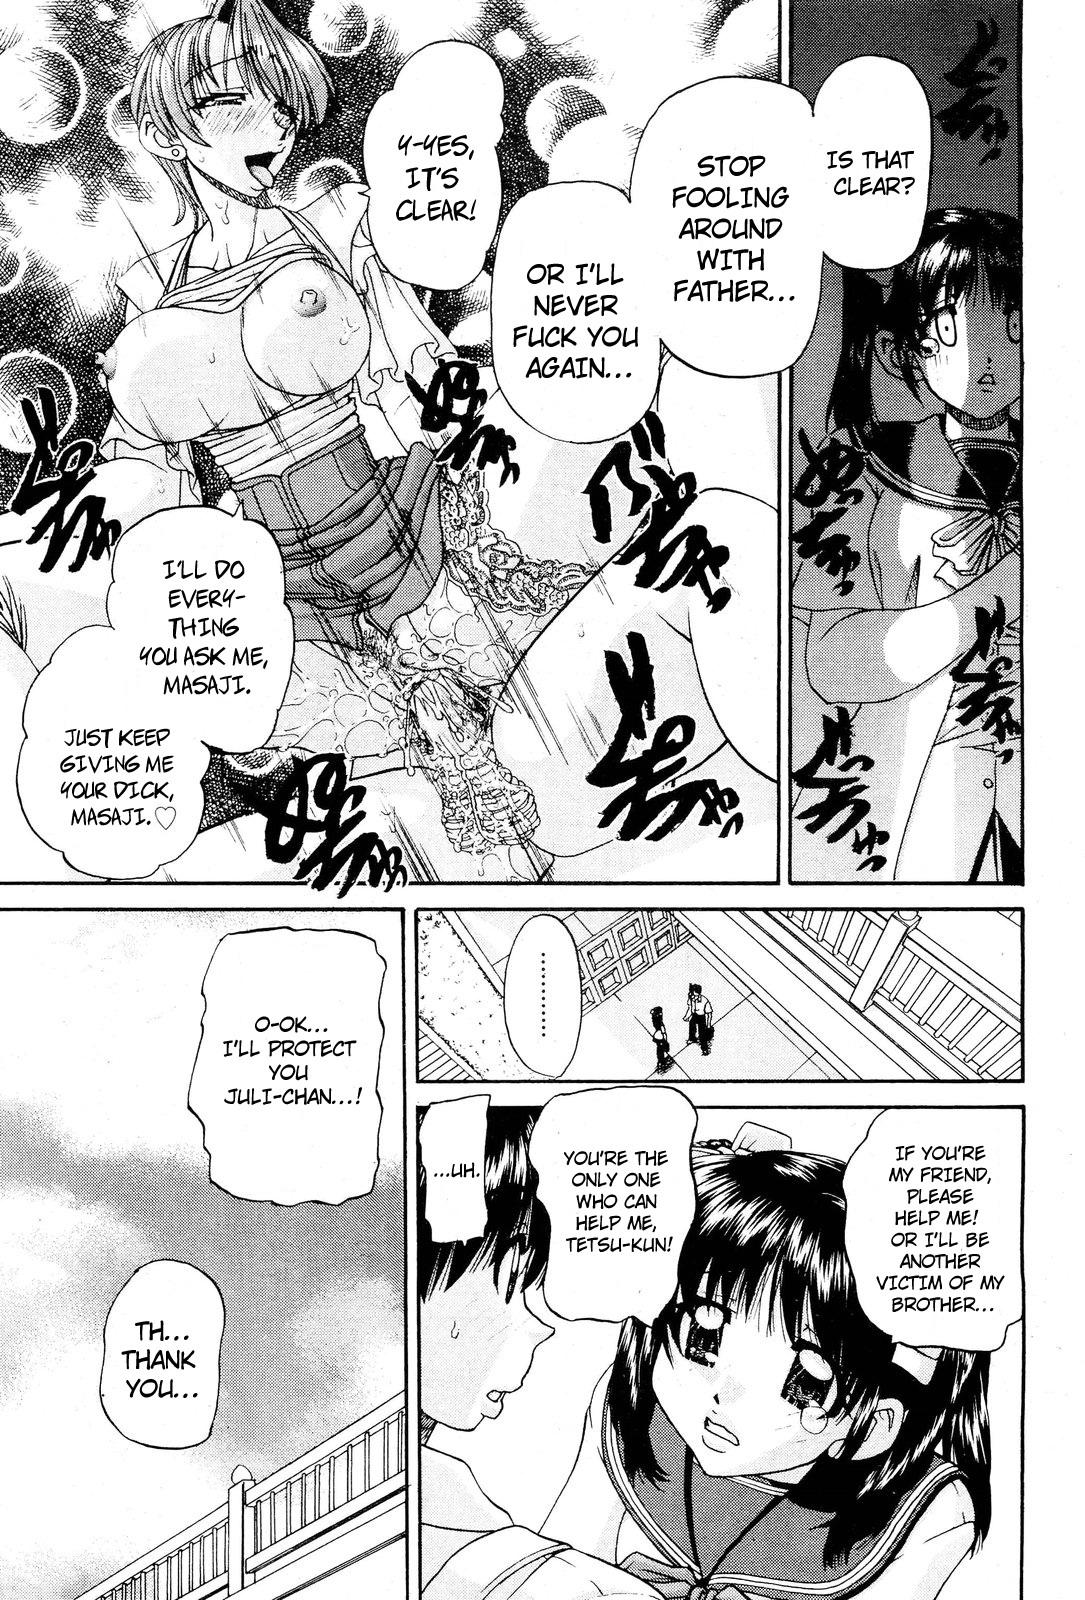 Negro My Brother is the Worst!! Ch.01-05 + bonus Cocksuckers - Page 6